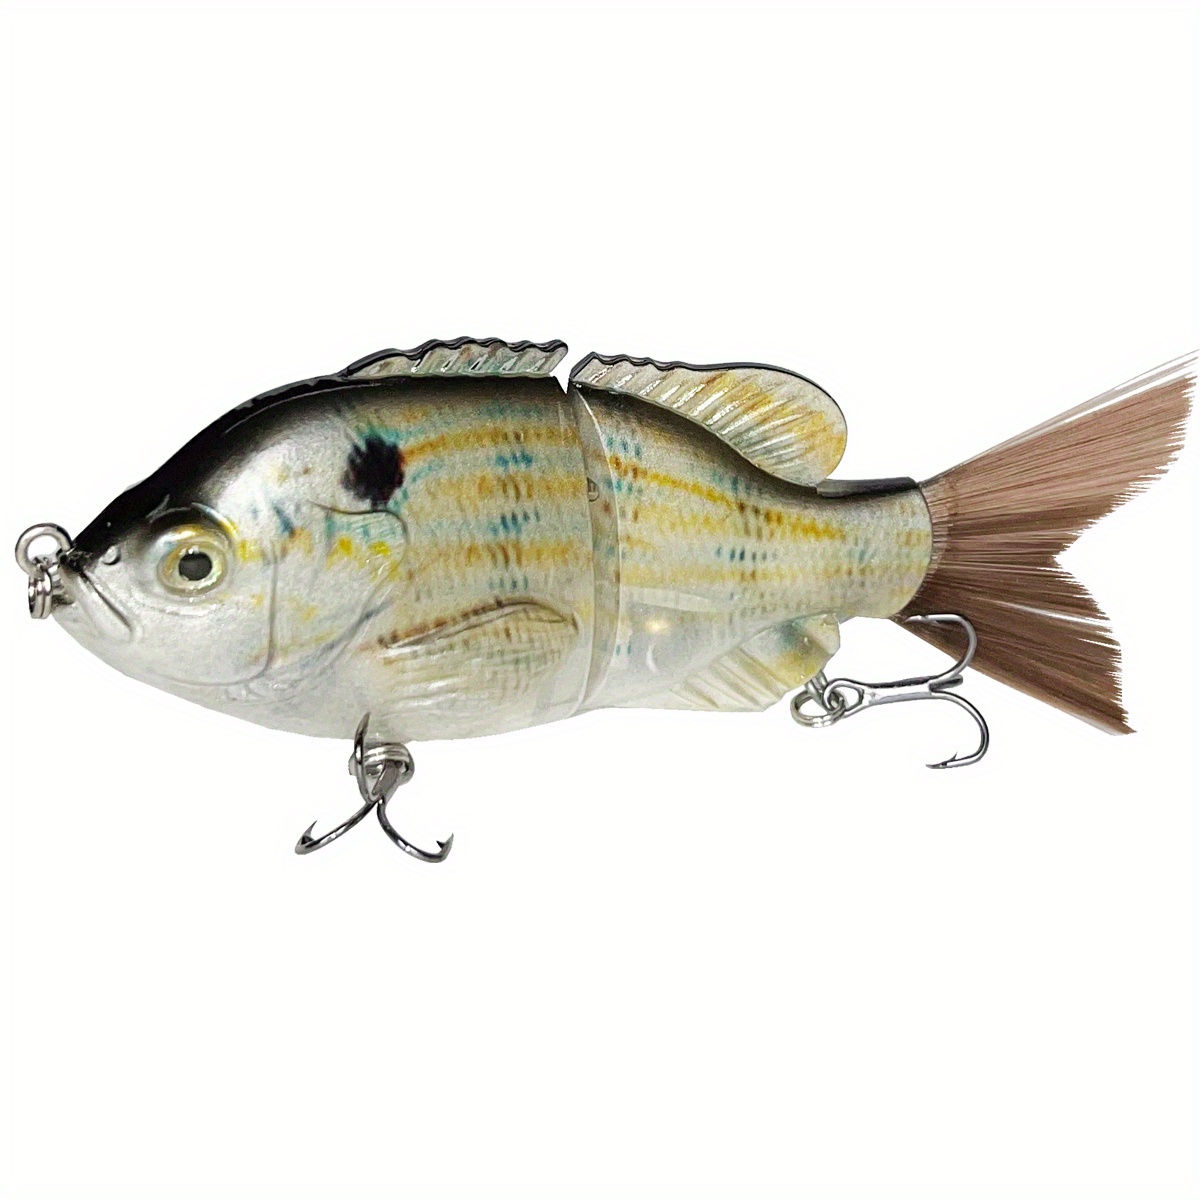 Discover the Best Fishing Lures for Your Next Adventure - Free Shipping  Worldwide